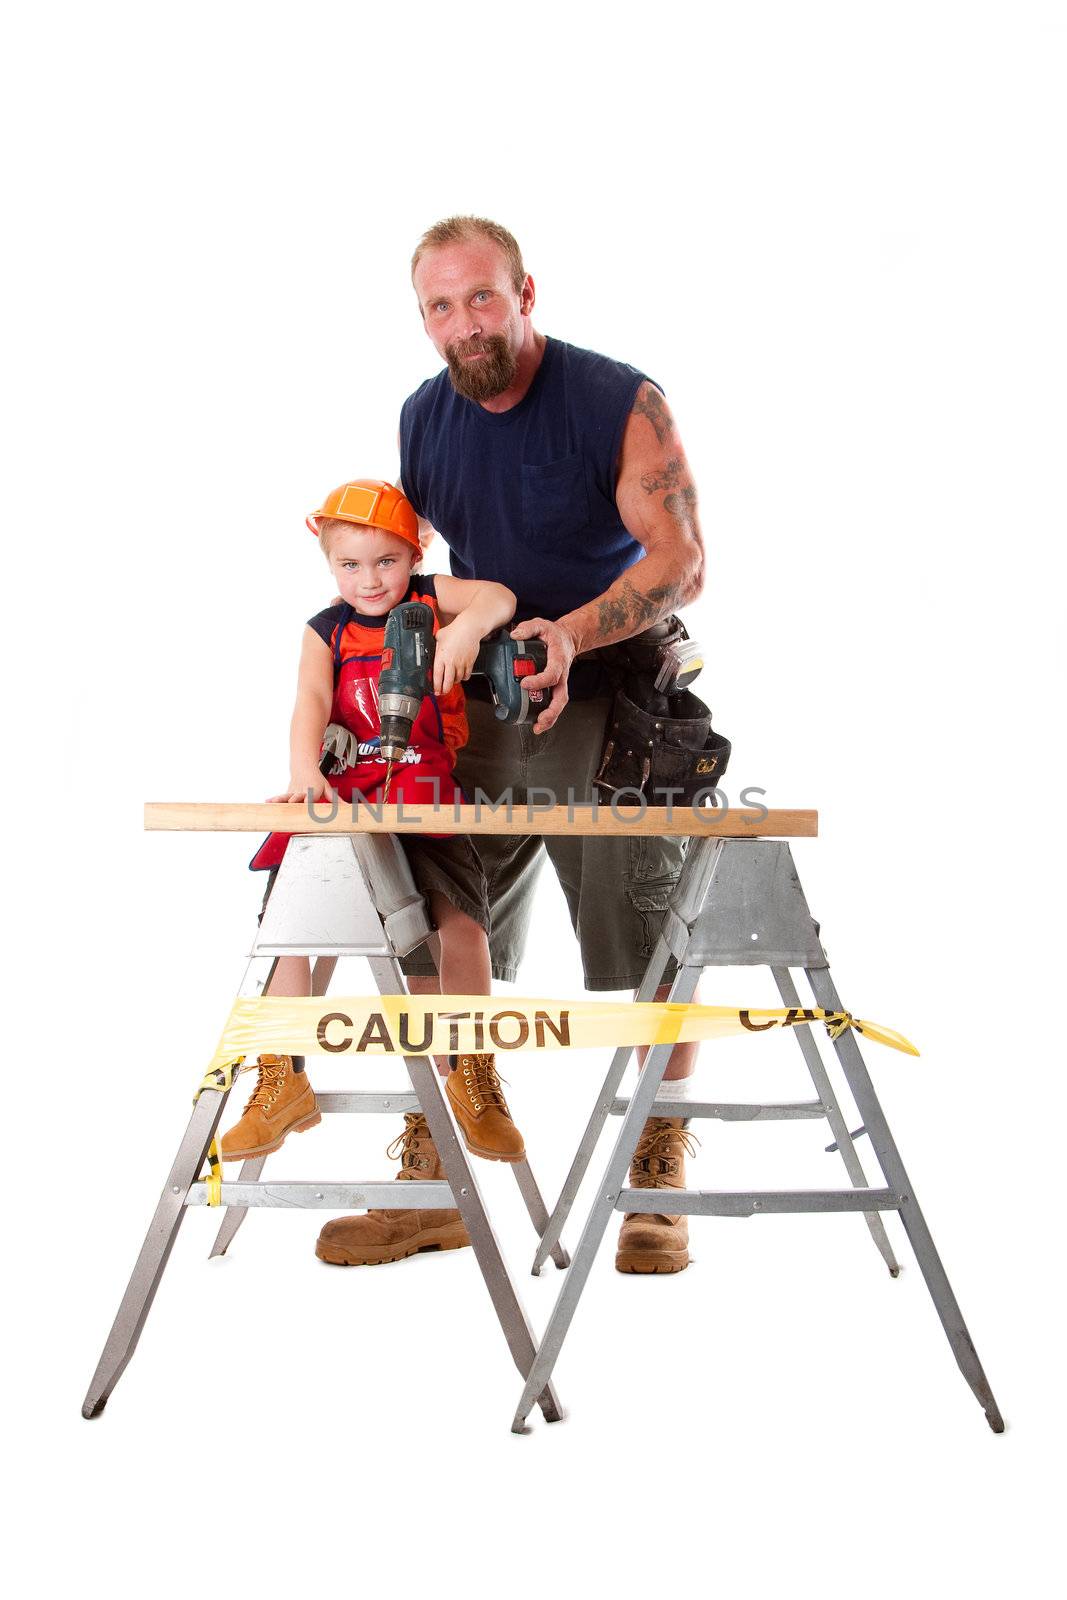 Caucasian dad is teaching cute son with construction helmet how to drill a hole in a wooden plank, isolated.